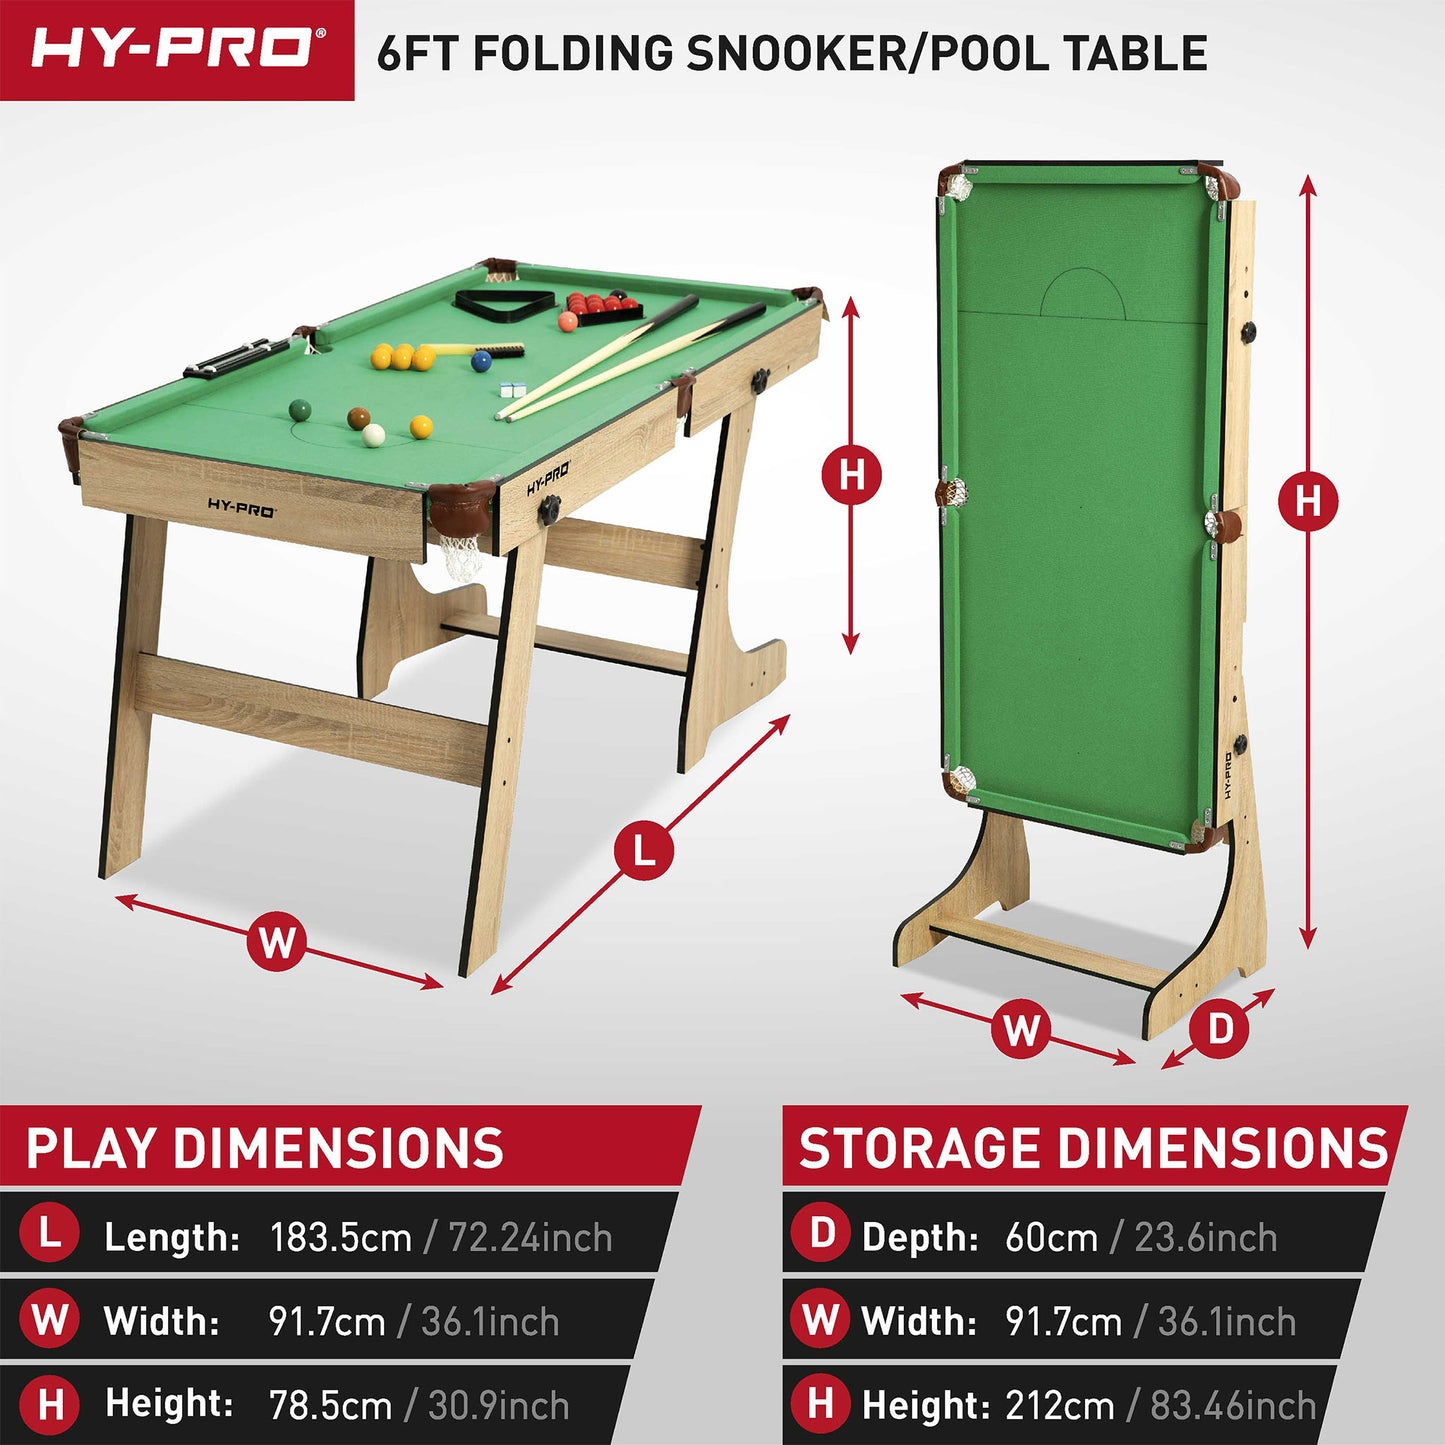 Hy-Pro 6ft Folding Snooker and Pool Table